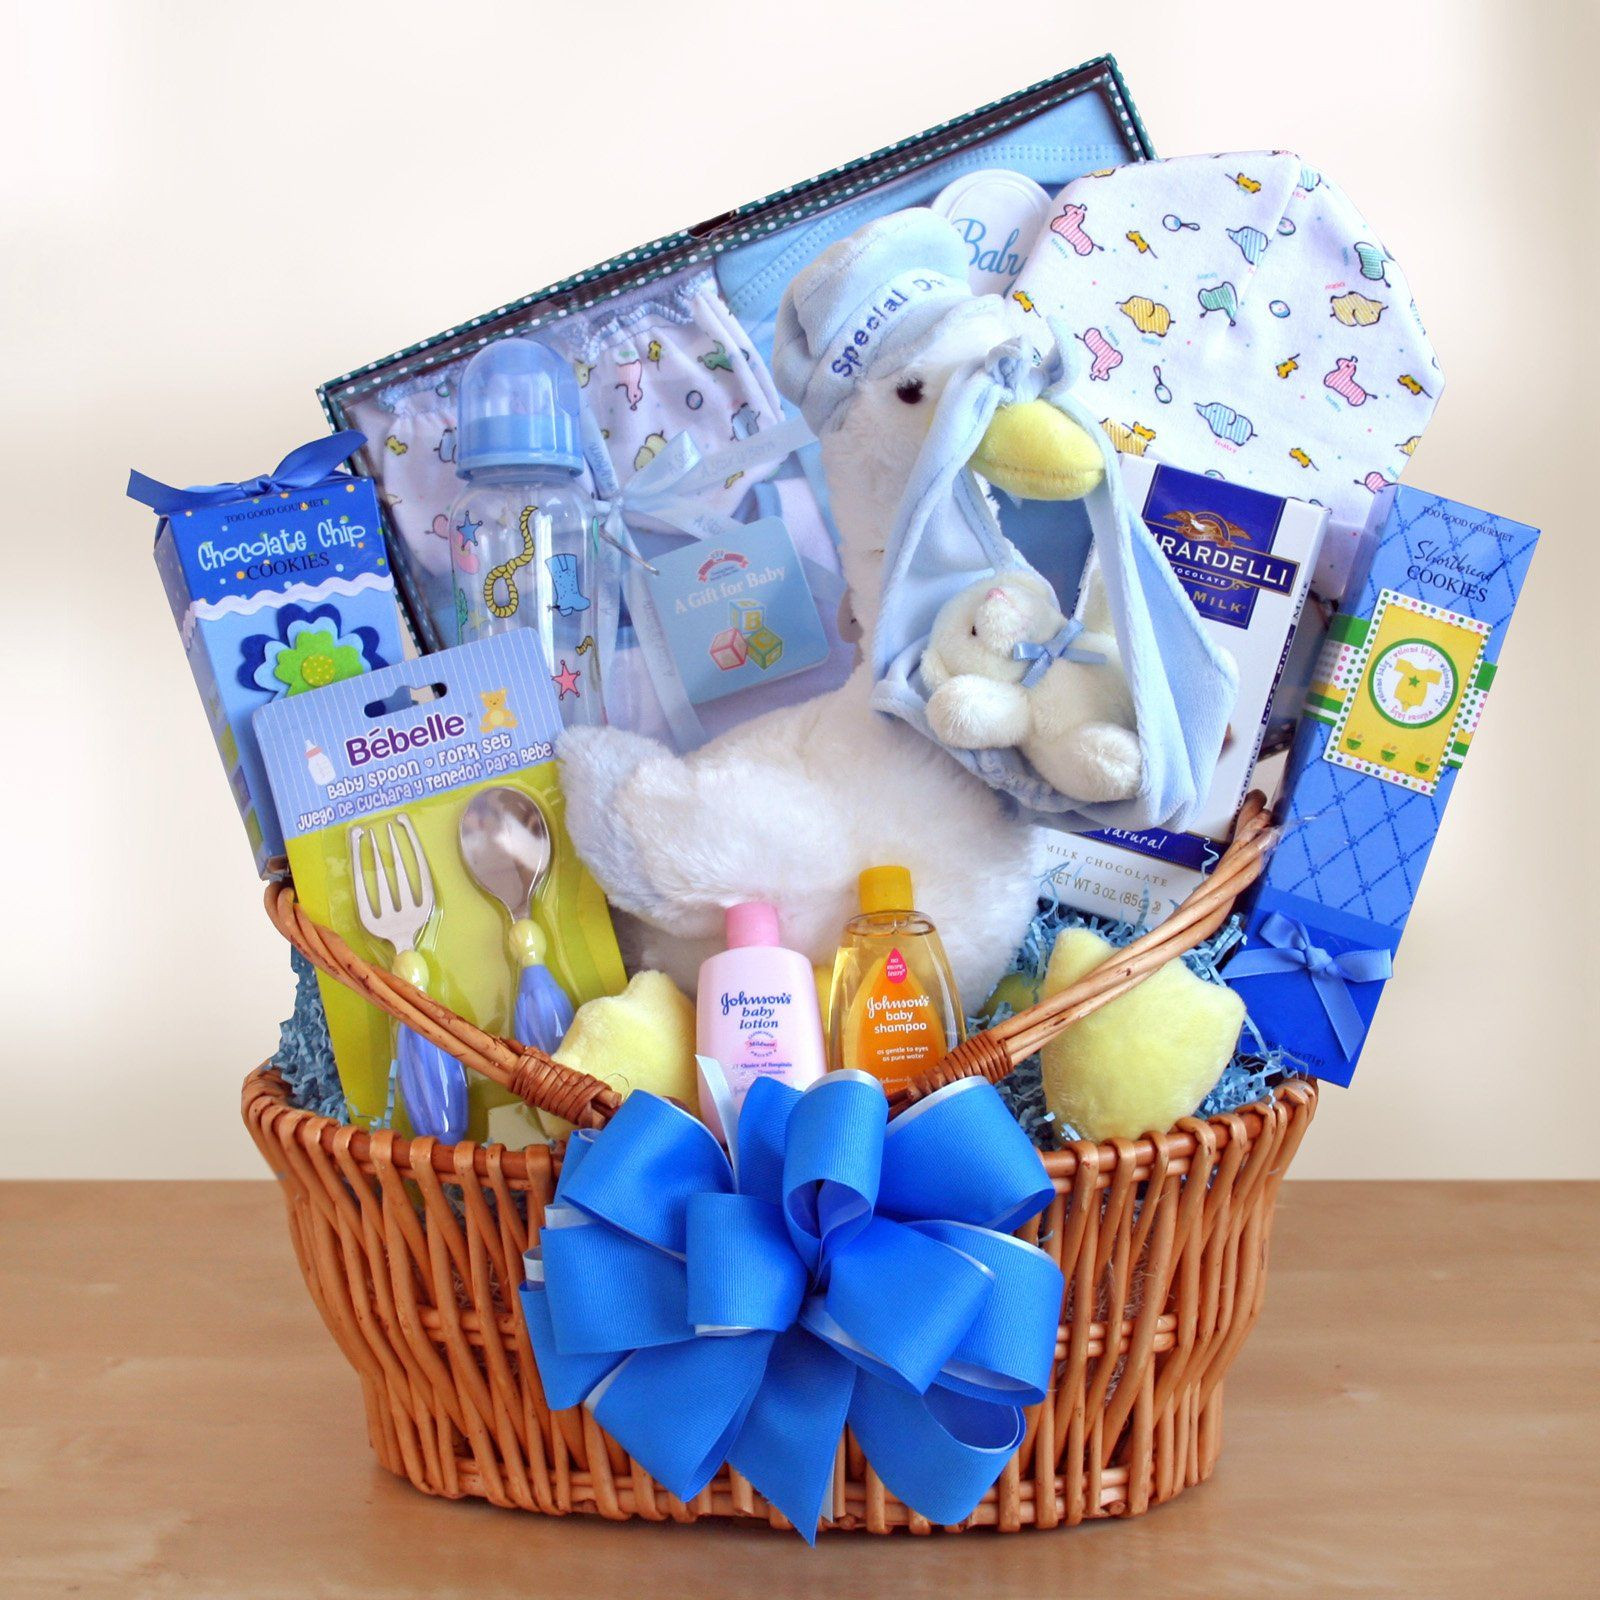 Toddler Gift Ideas For Boys
 Special Stork Delivery Baby Boy Gift Basket